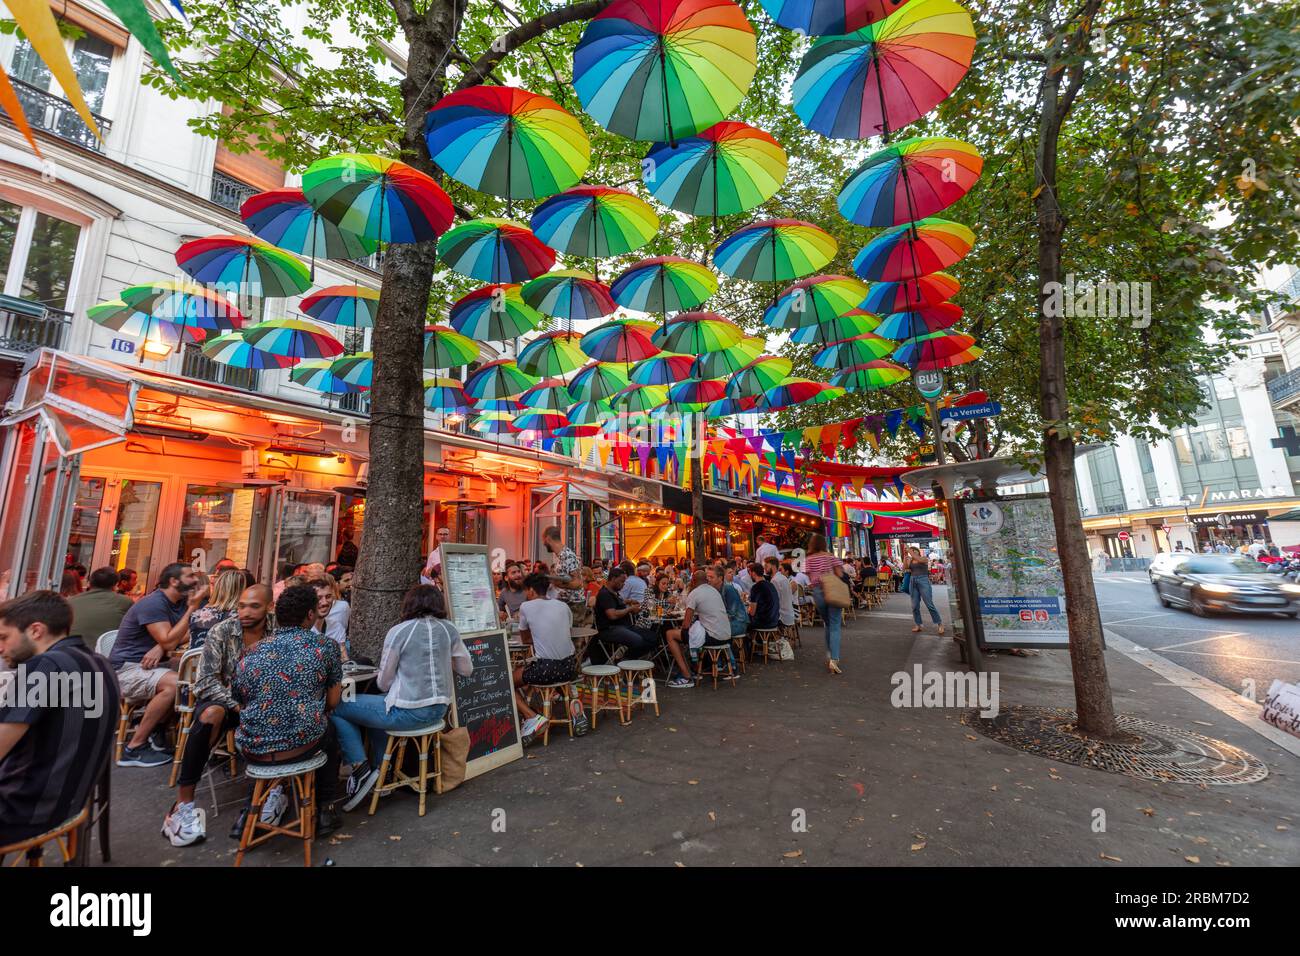 Romantic Paris. People enjoy outside dining at restaurants with PRIDE, LGBTQ+ decorations in Rue des Archives, Paris. Stock Photo